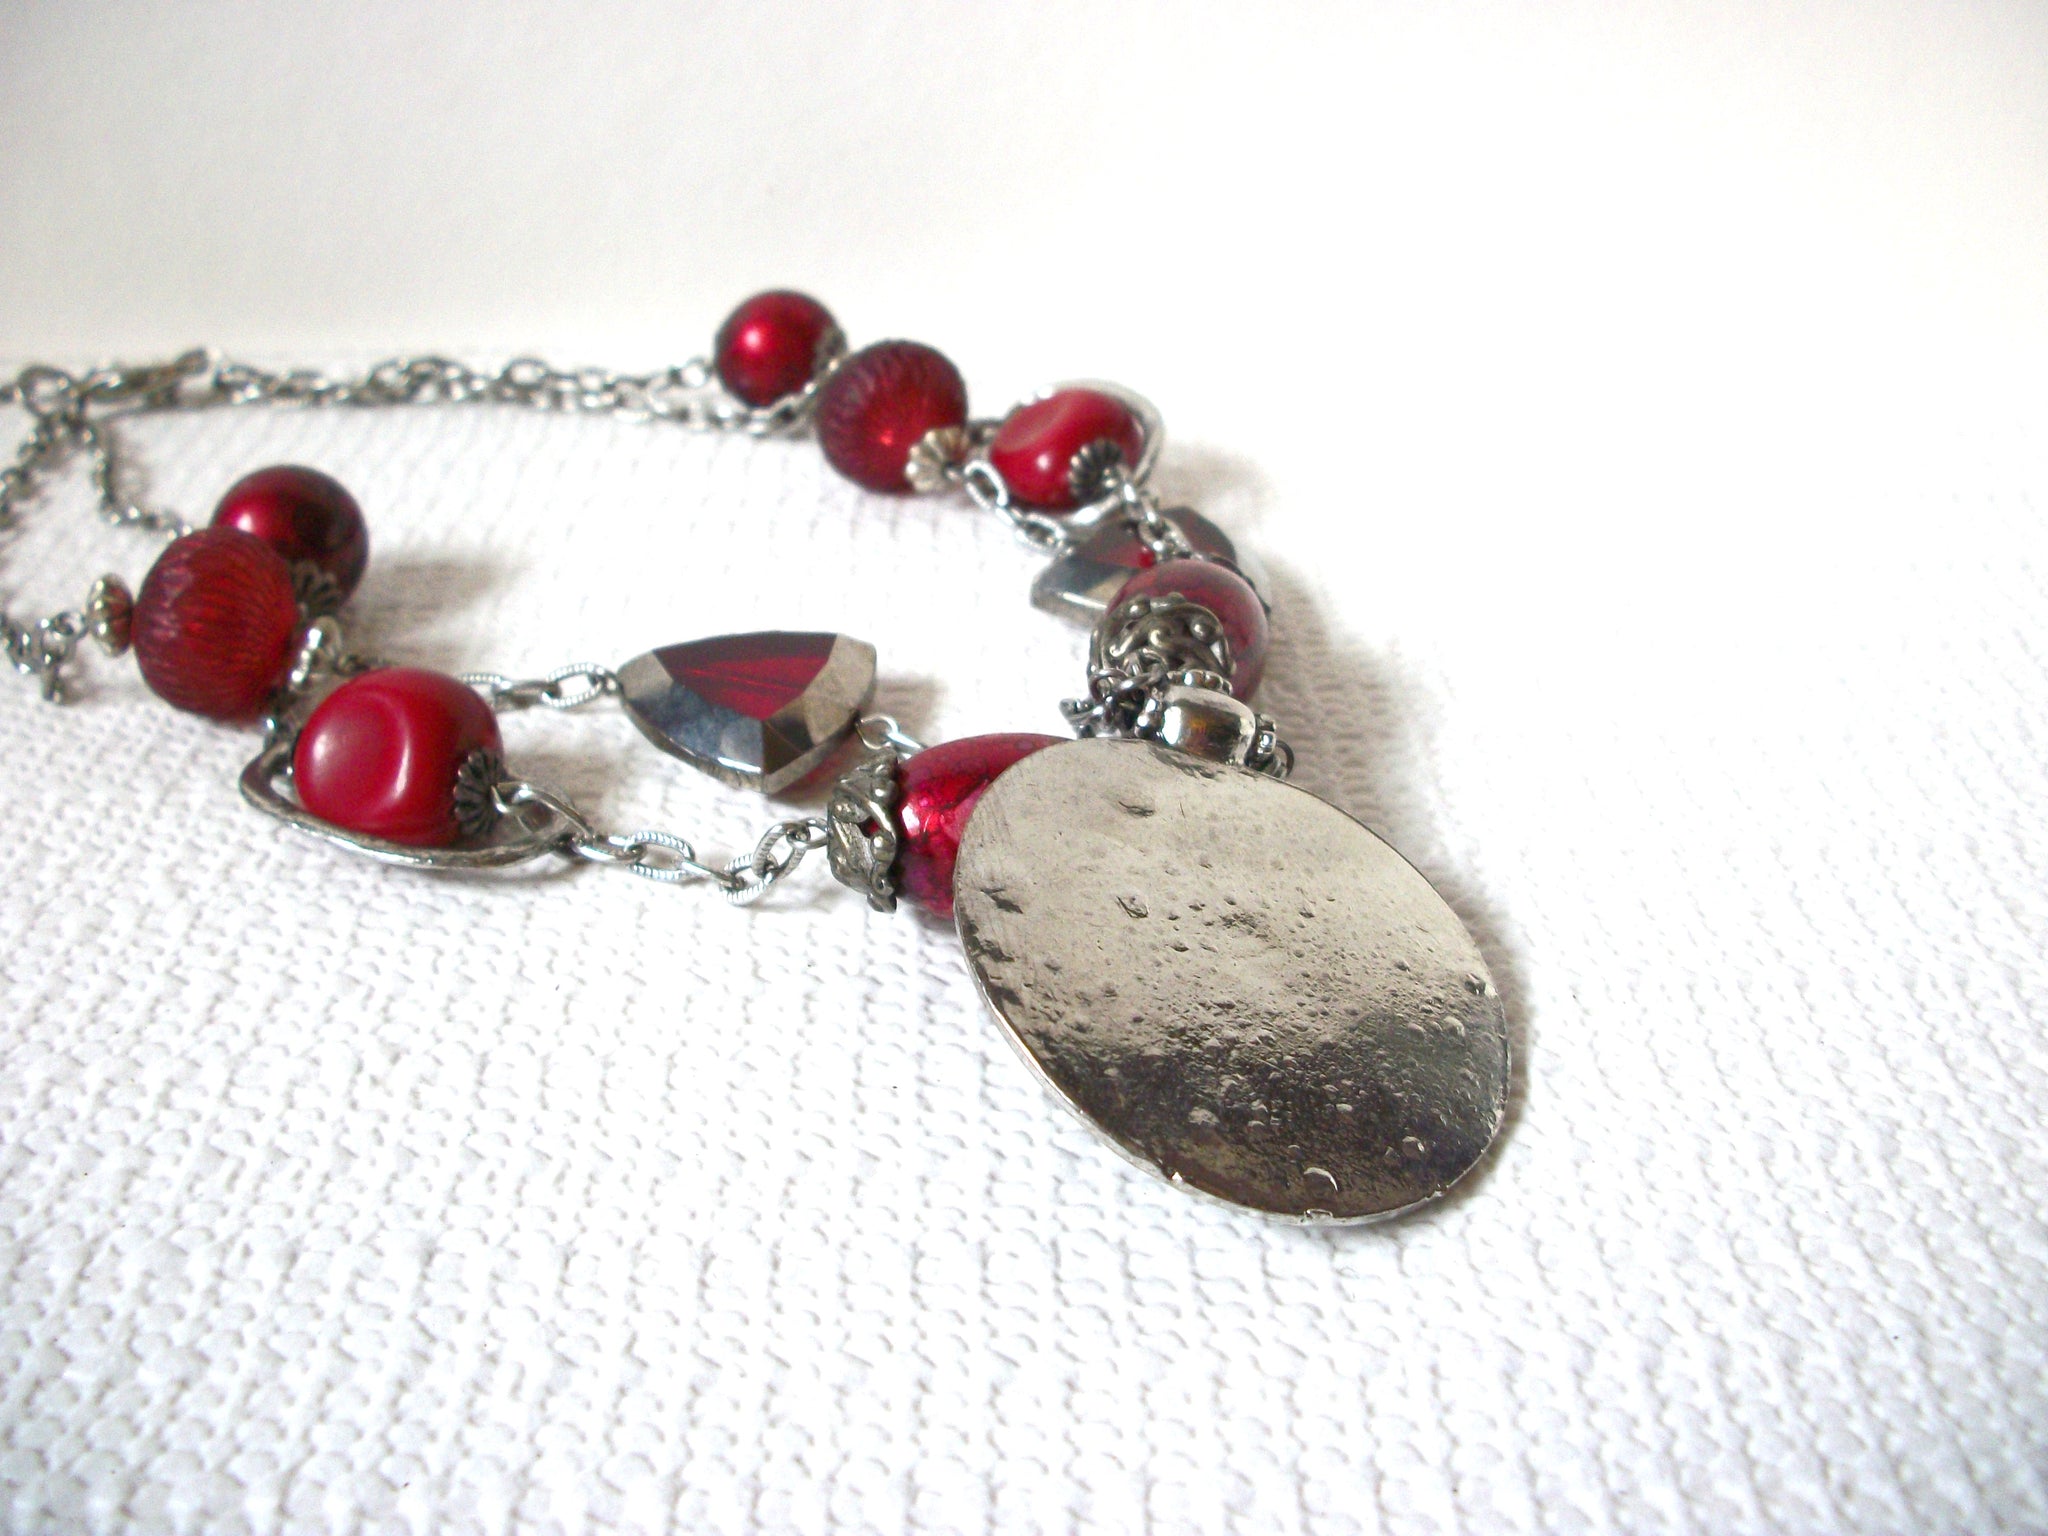 Vintage Silver Cranberry Red Mad Woman necklace 92520